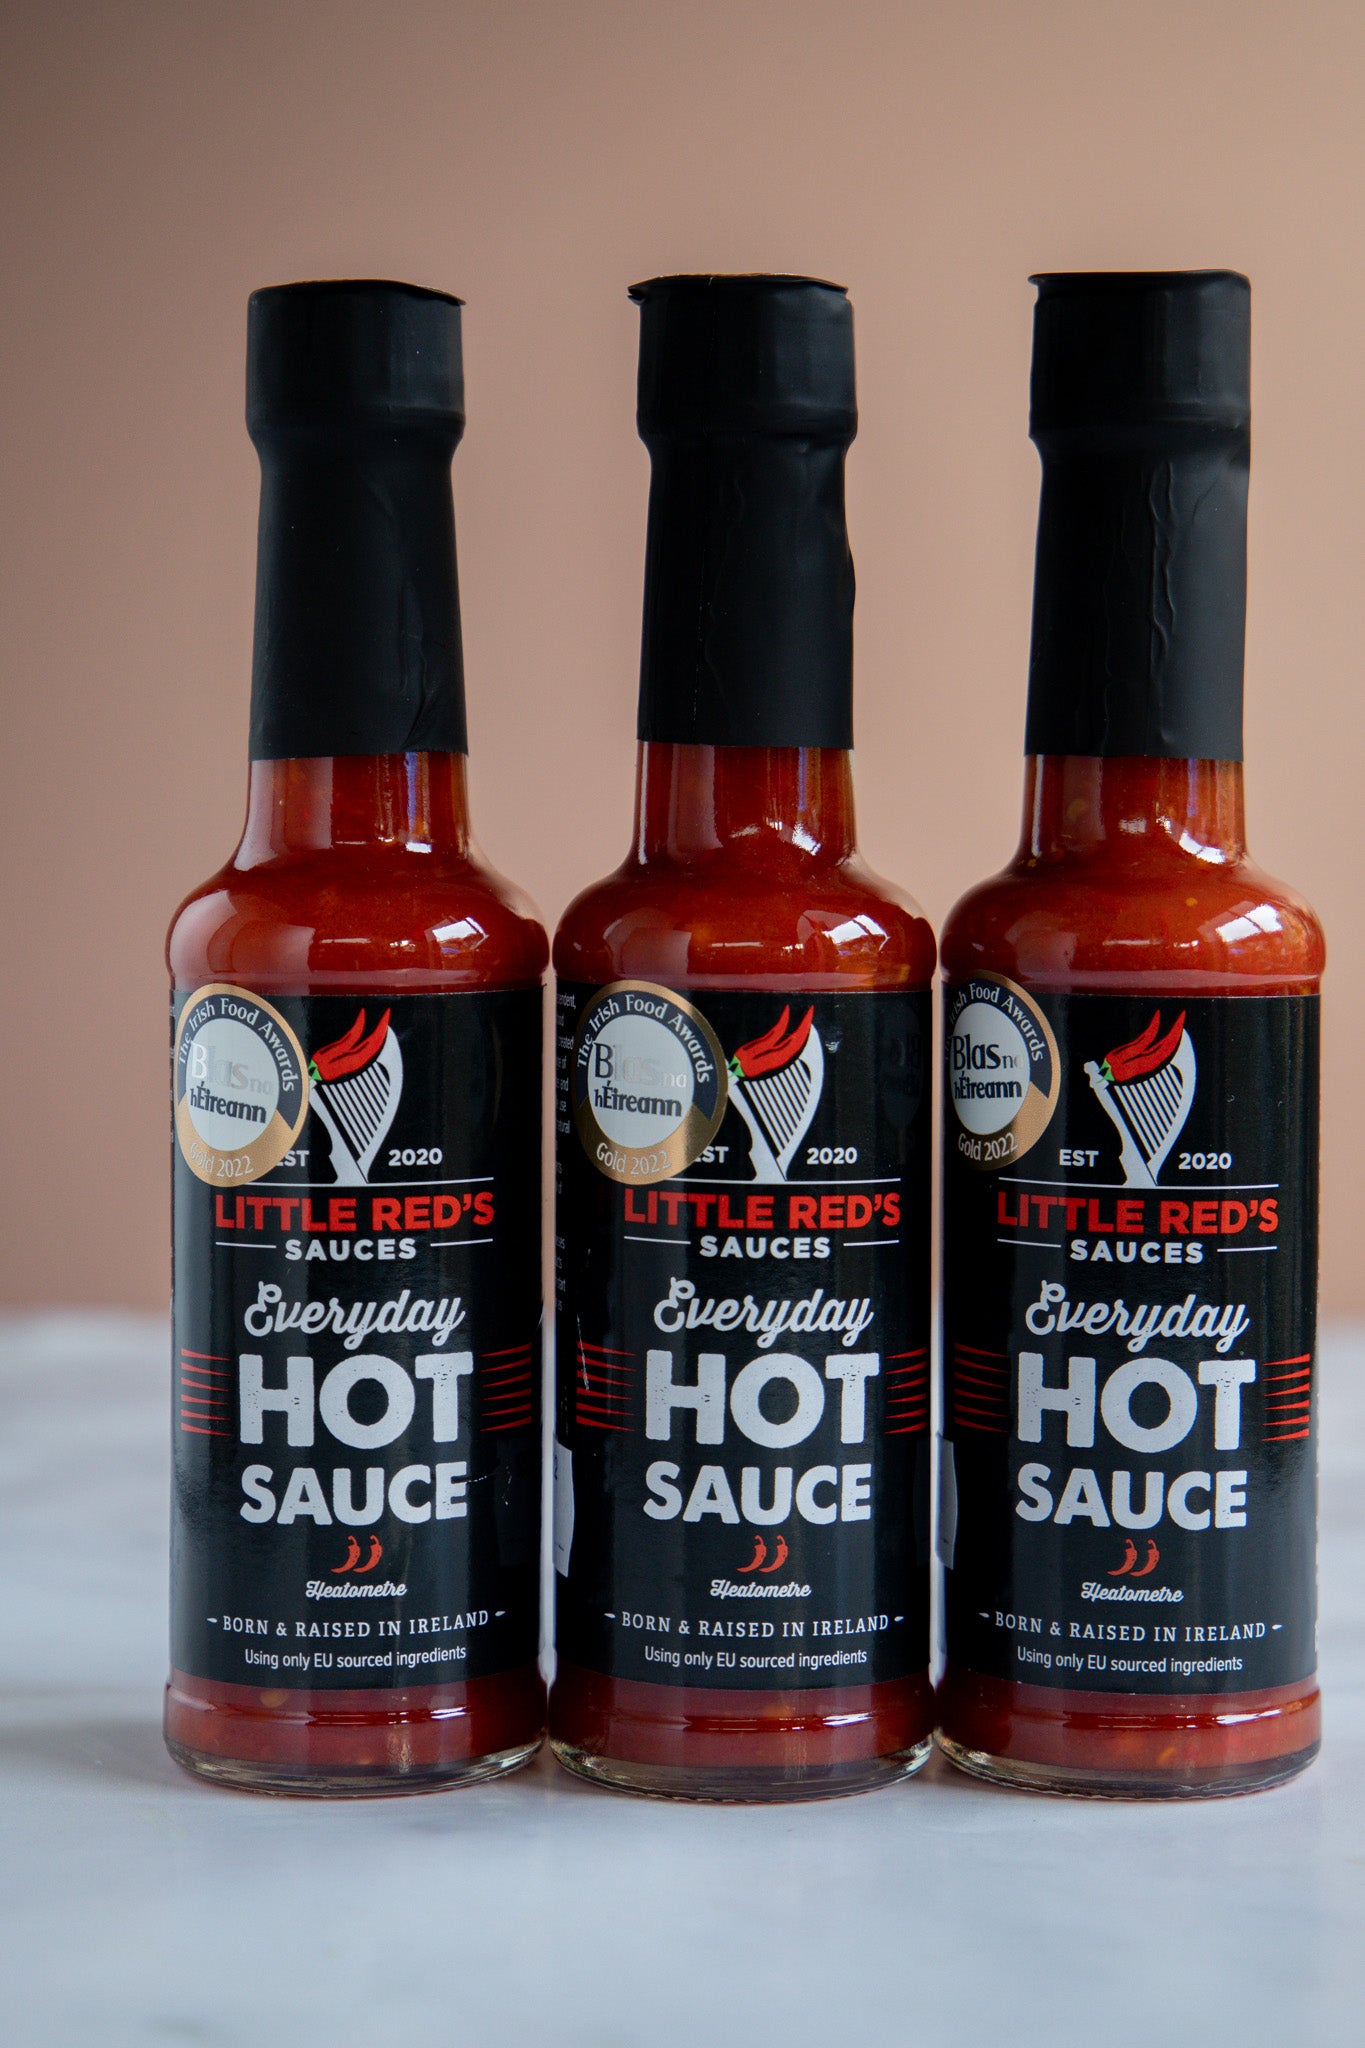 Three bottles of Little Red's Fermented Chili and Garlic Hot Sauce lined up in a row, featuring bold labels that highlight the unique fermentation process. The deep red sauce, enriched with garlic, is visible through the clear glass, presenting a tantalizing option for spice lovers and gourmet enthusiasts.